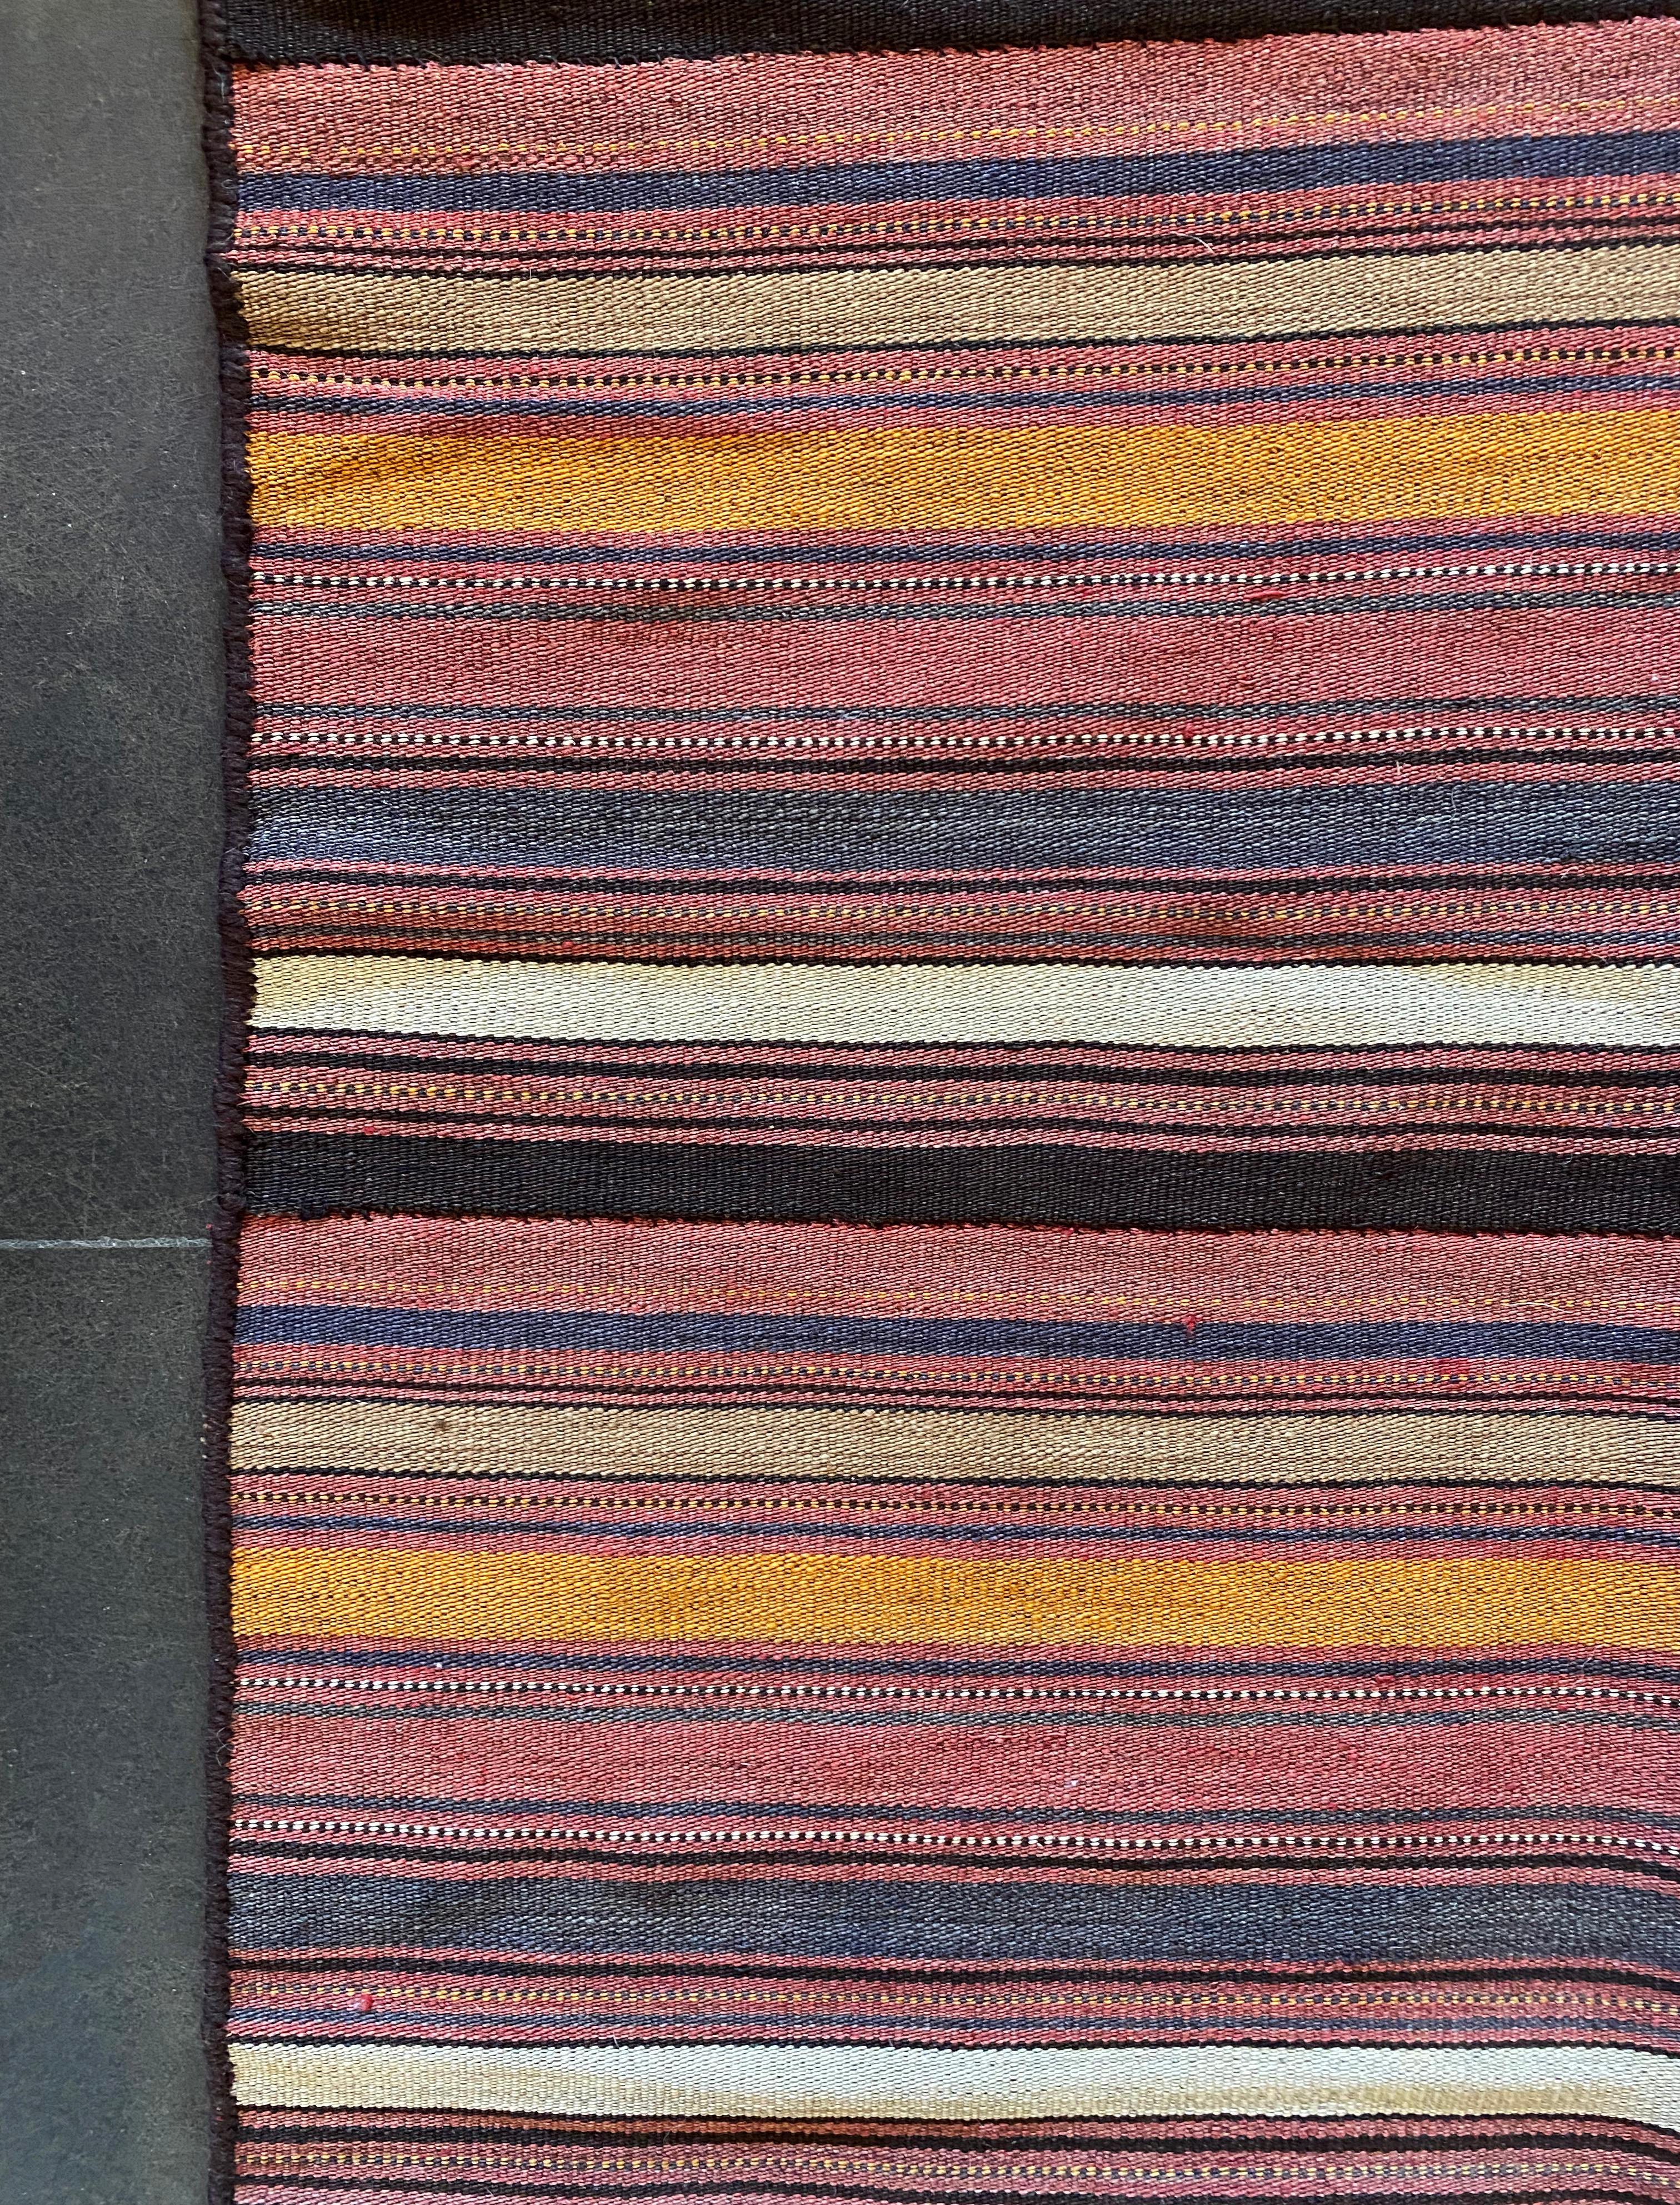 Striped, Multicoloured Turkish Wool Kilim Rug, Early 20th Century For Sale 3